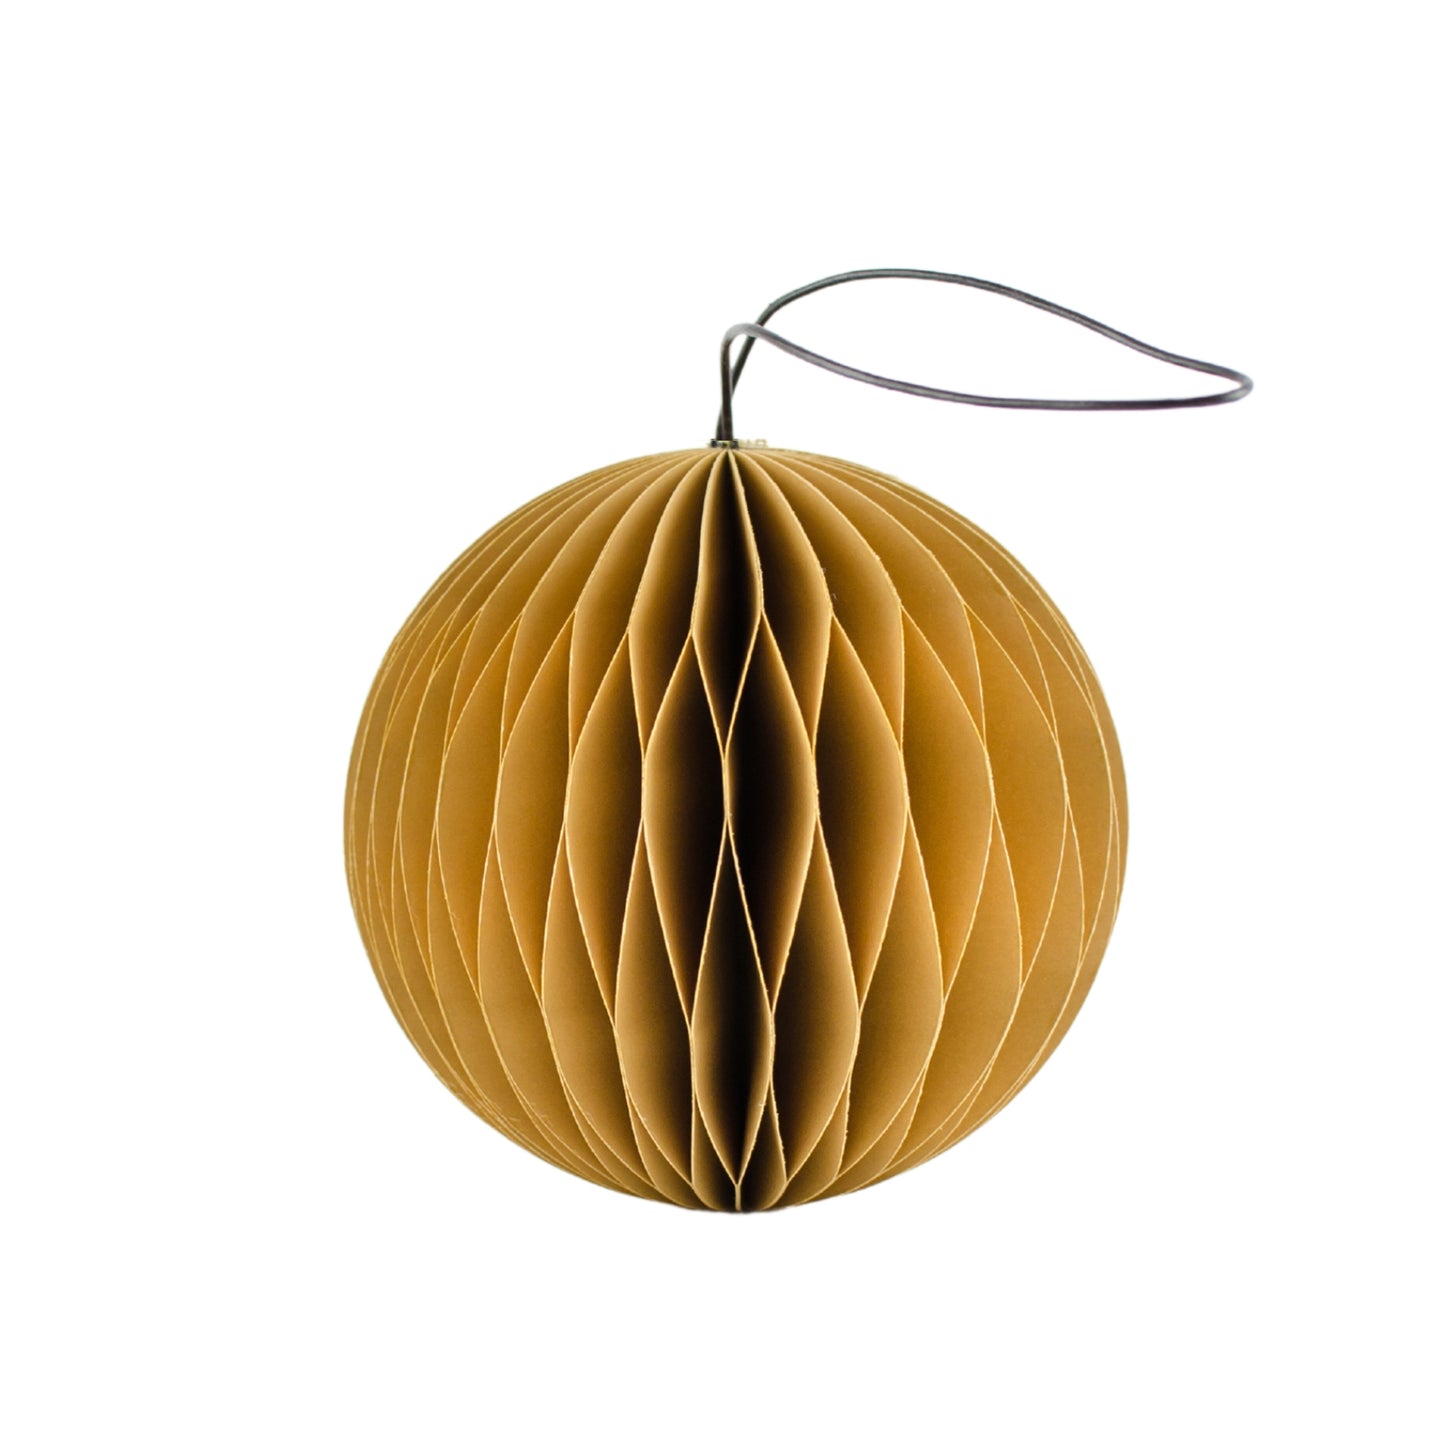 Paper Sphere Ornament WAS $10